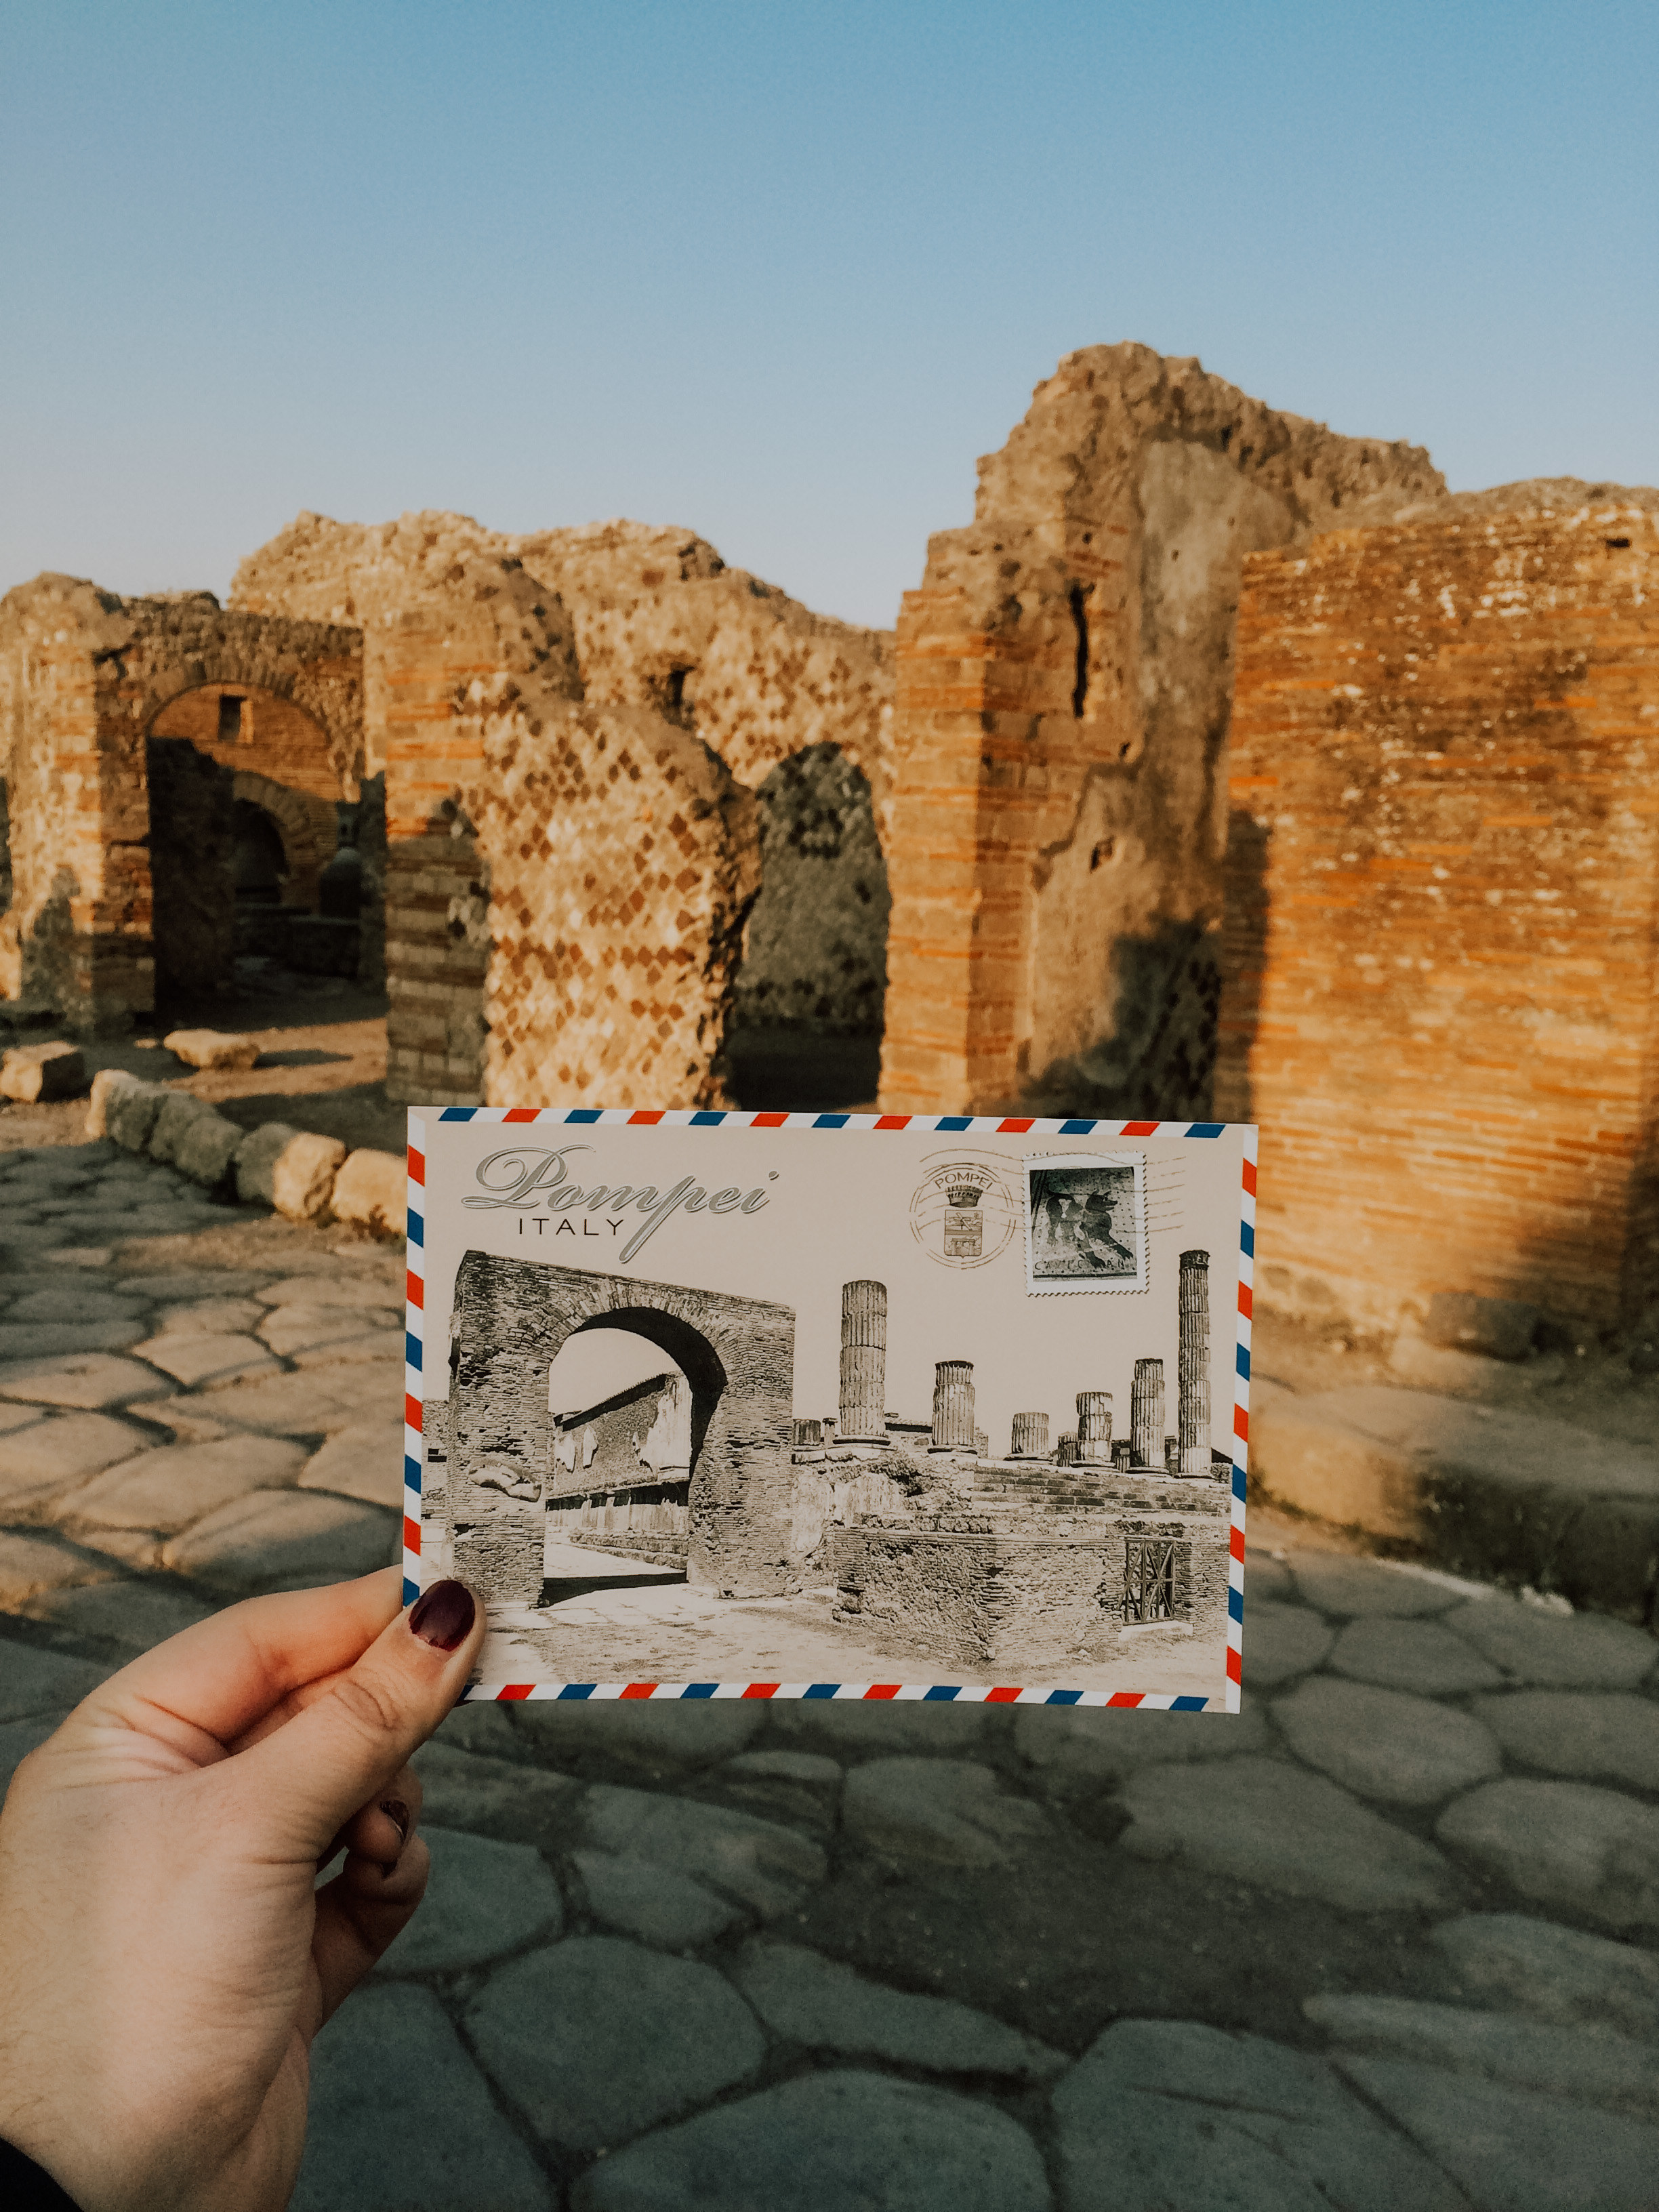 photo of a hand holding up a postcard of Pompeii in front of the ruins in Pompeii